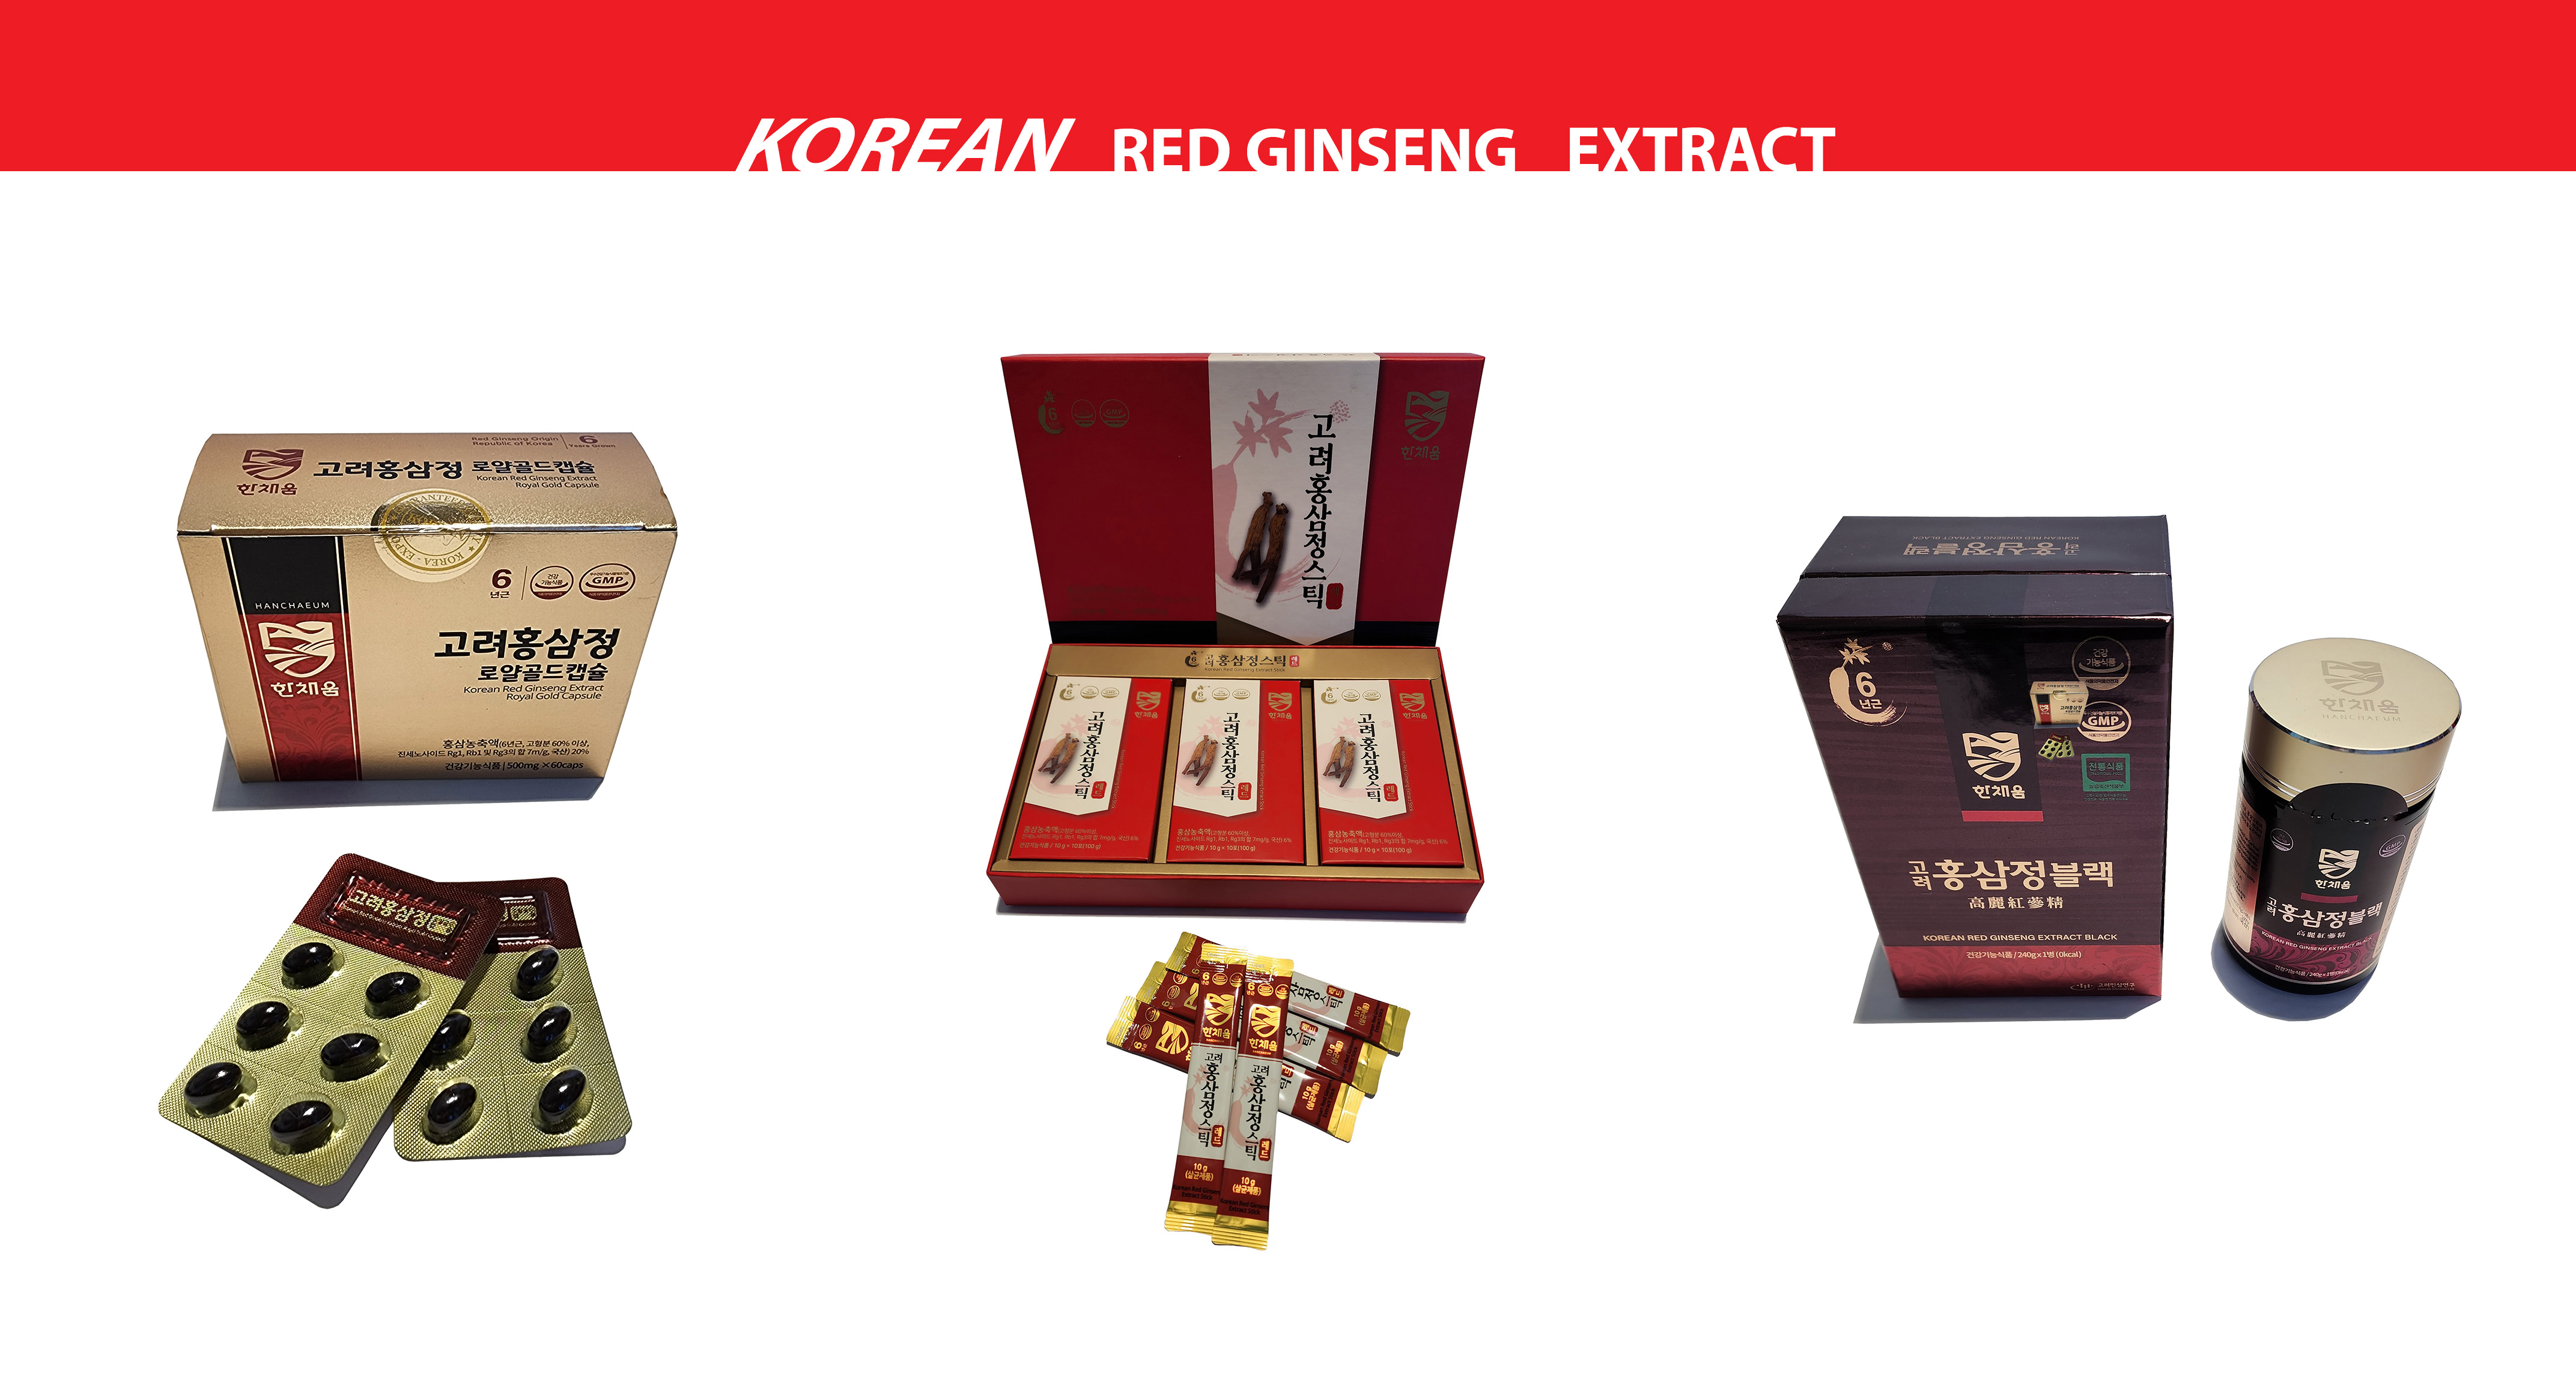 Our special product for those who prefer something with a kick. Red Ginseng Extract!